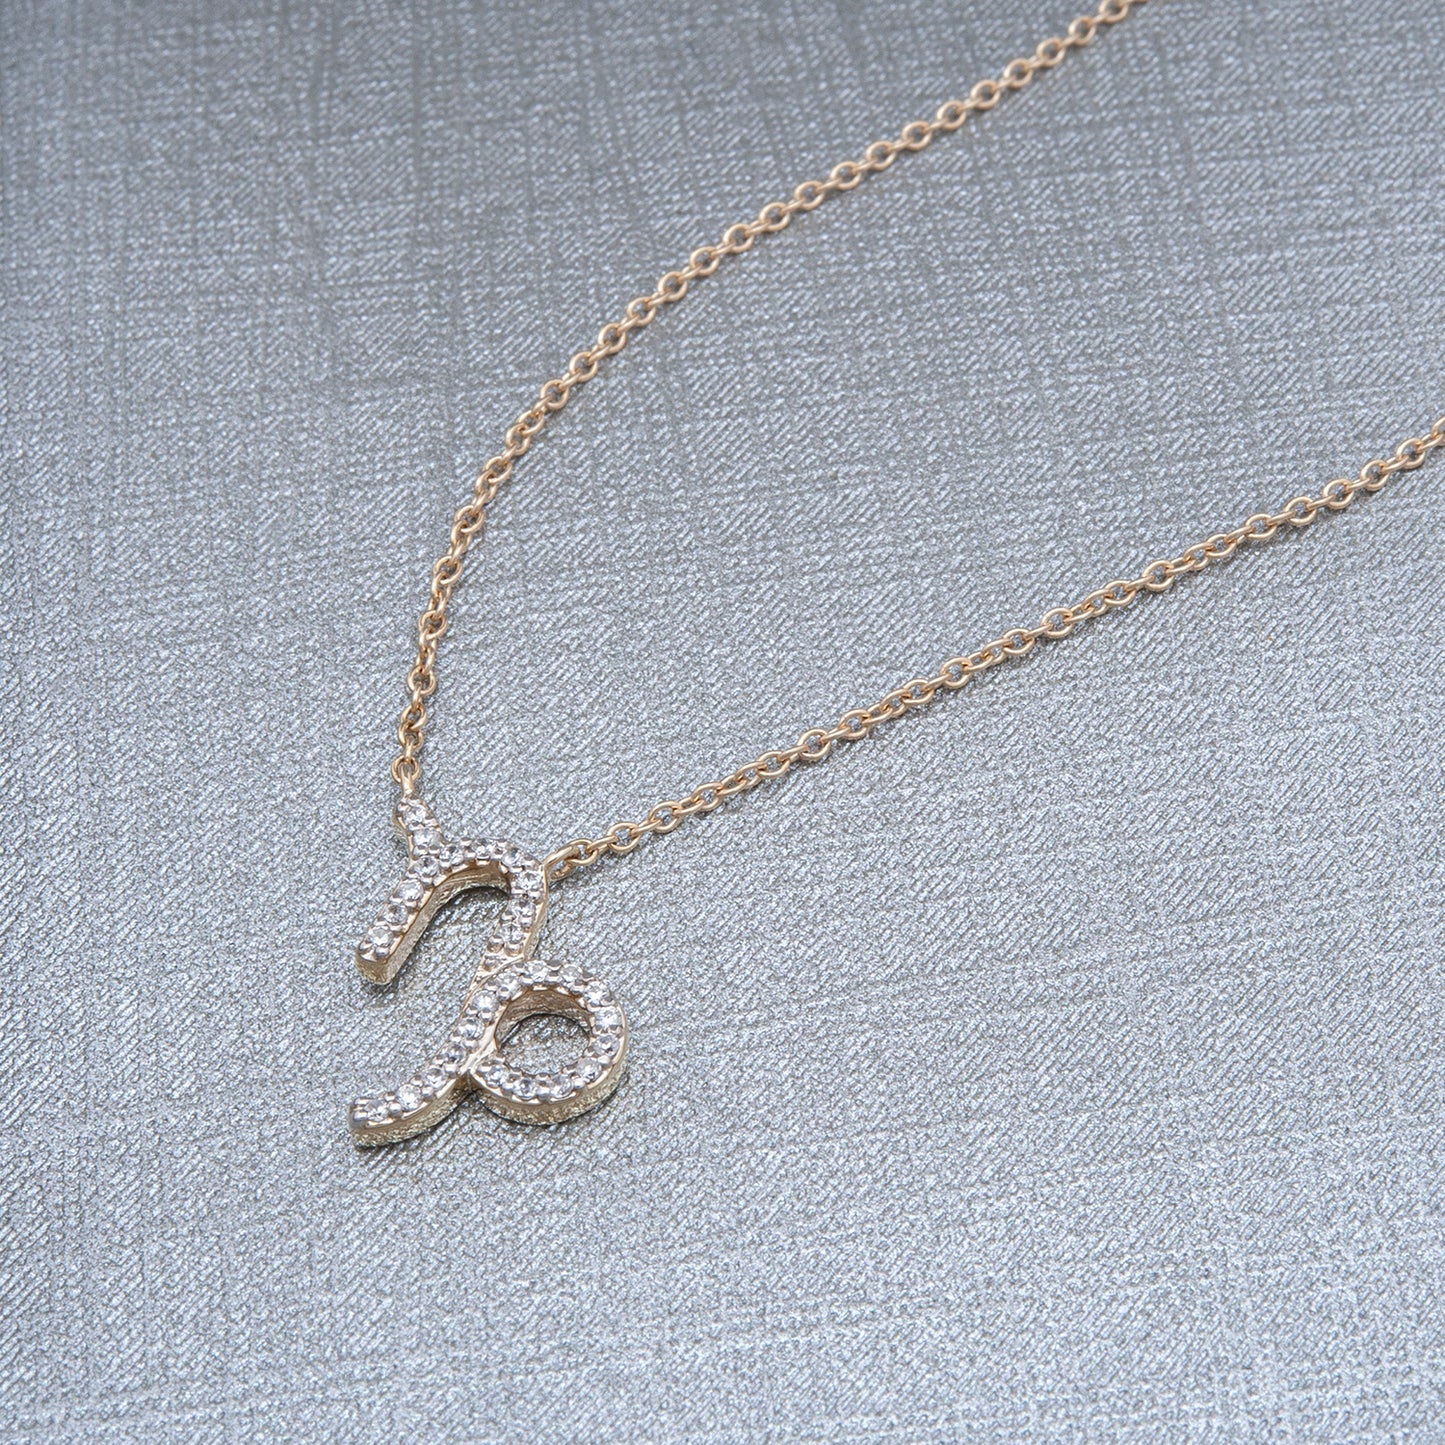 Capricorn Zodiac Diamond Necklace with Gold Chain Placed on cloth